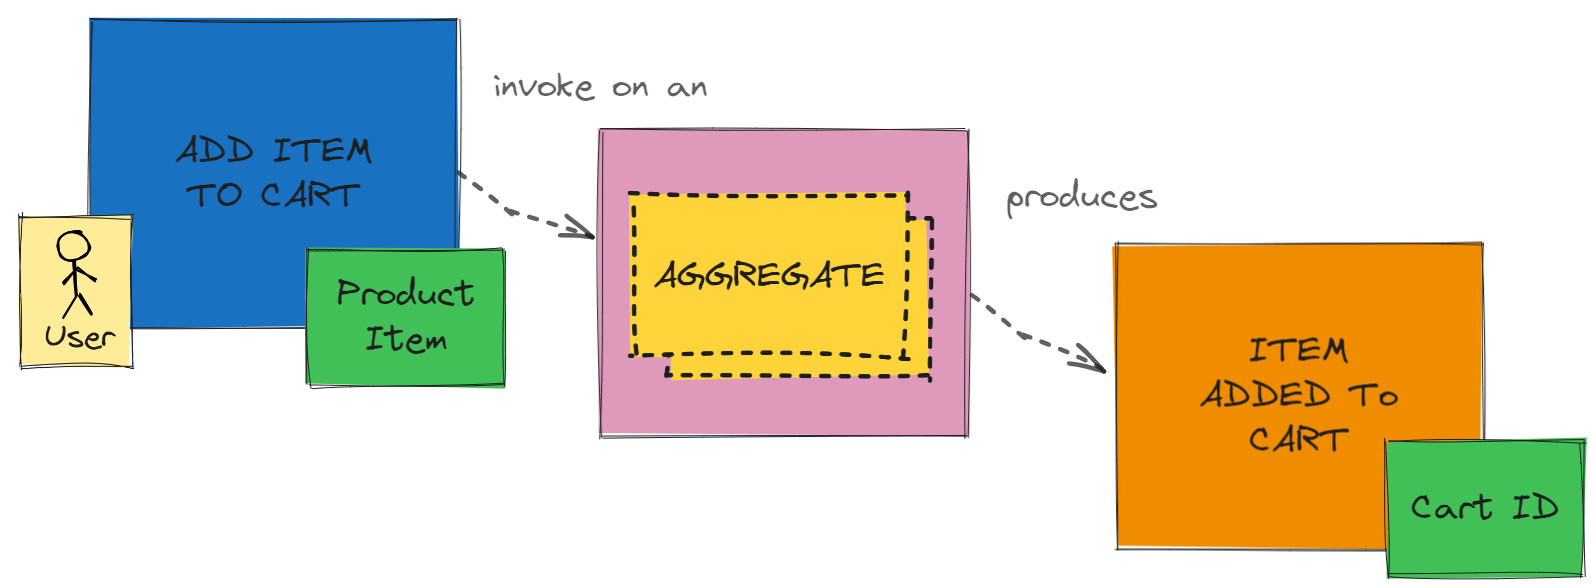 Event Storming - Command invoked on Aggregate produces Event